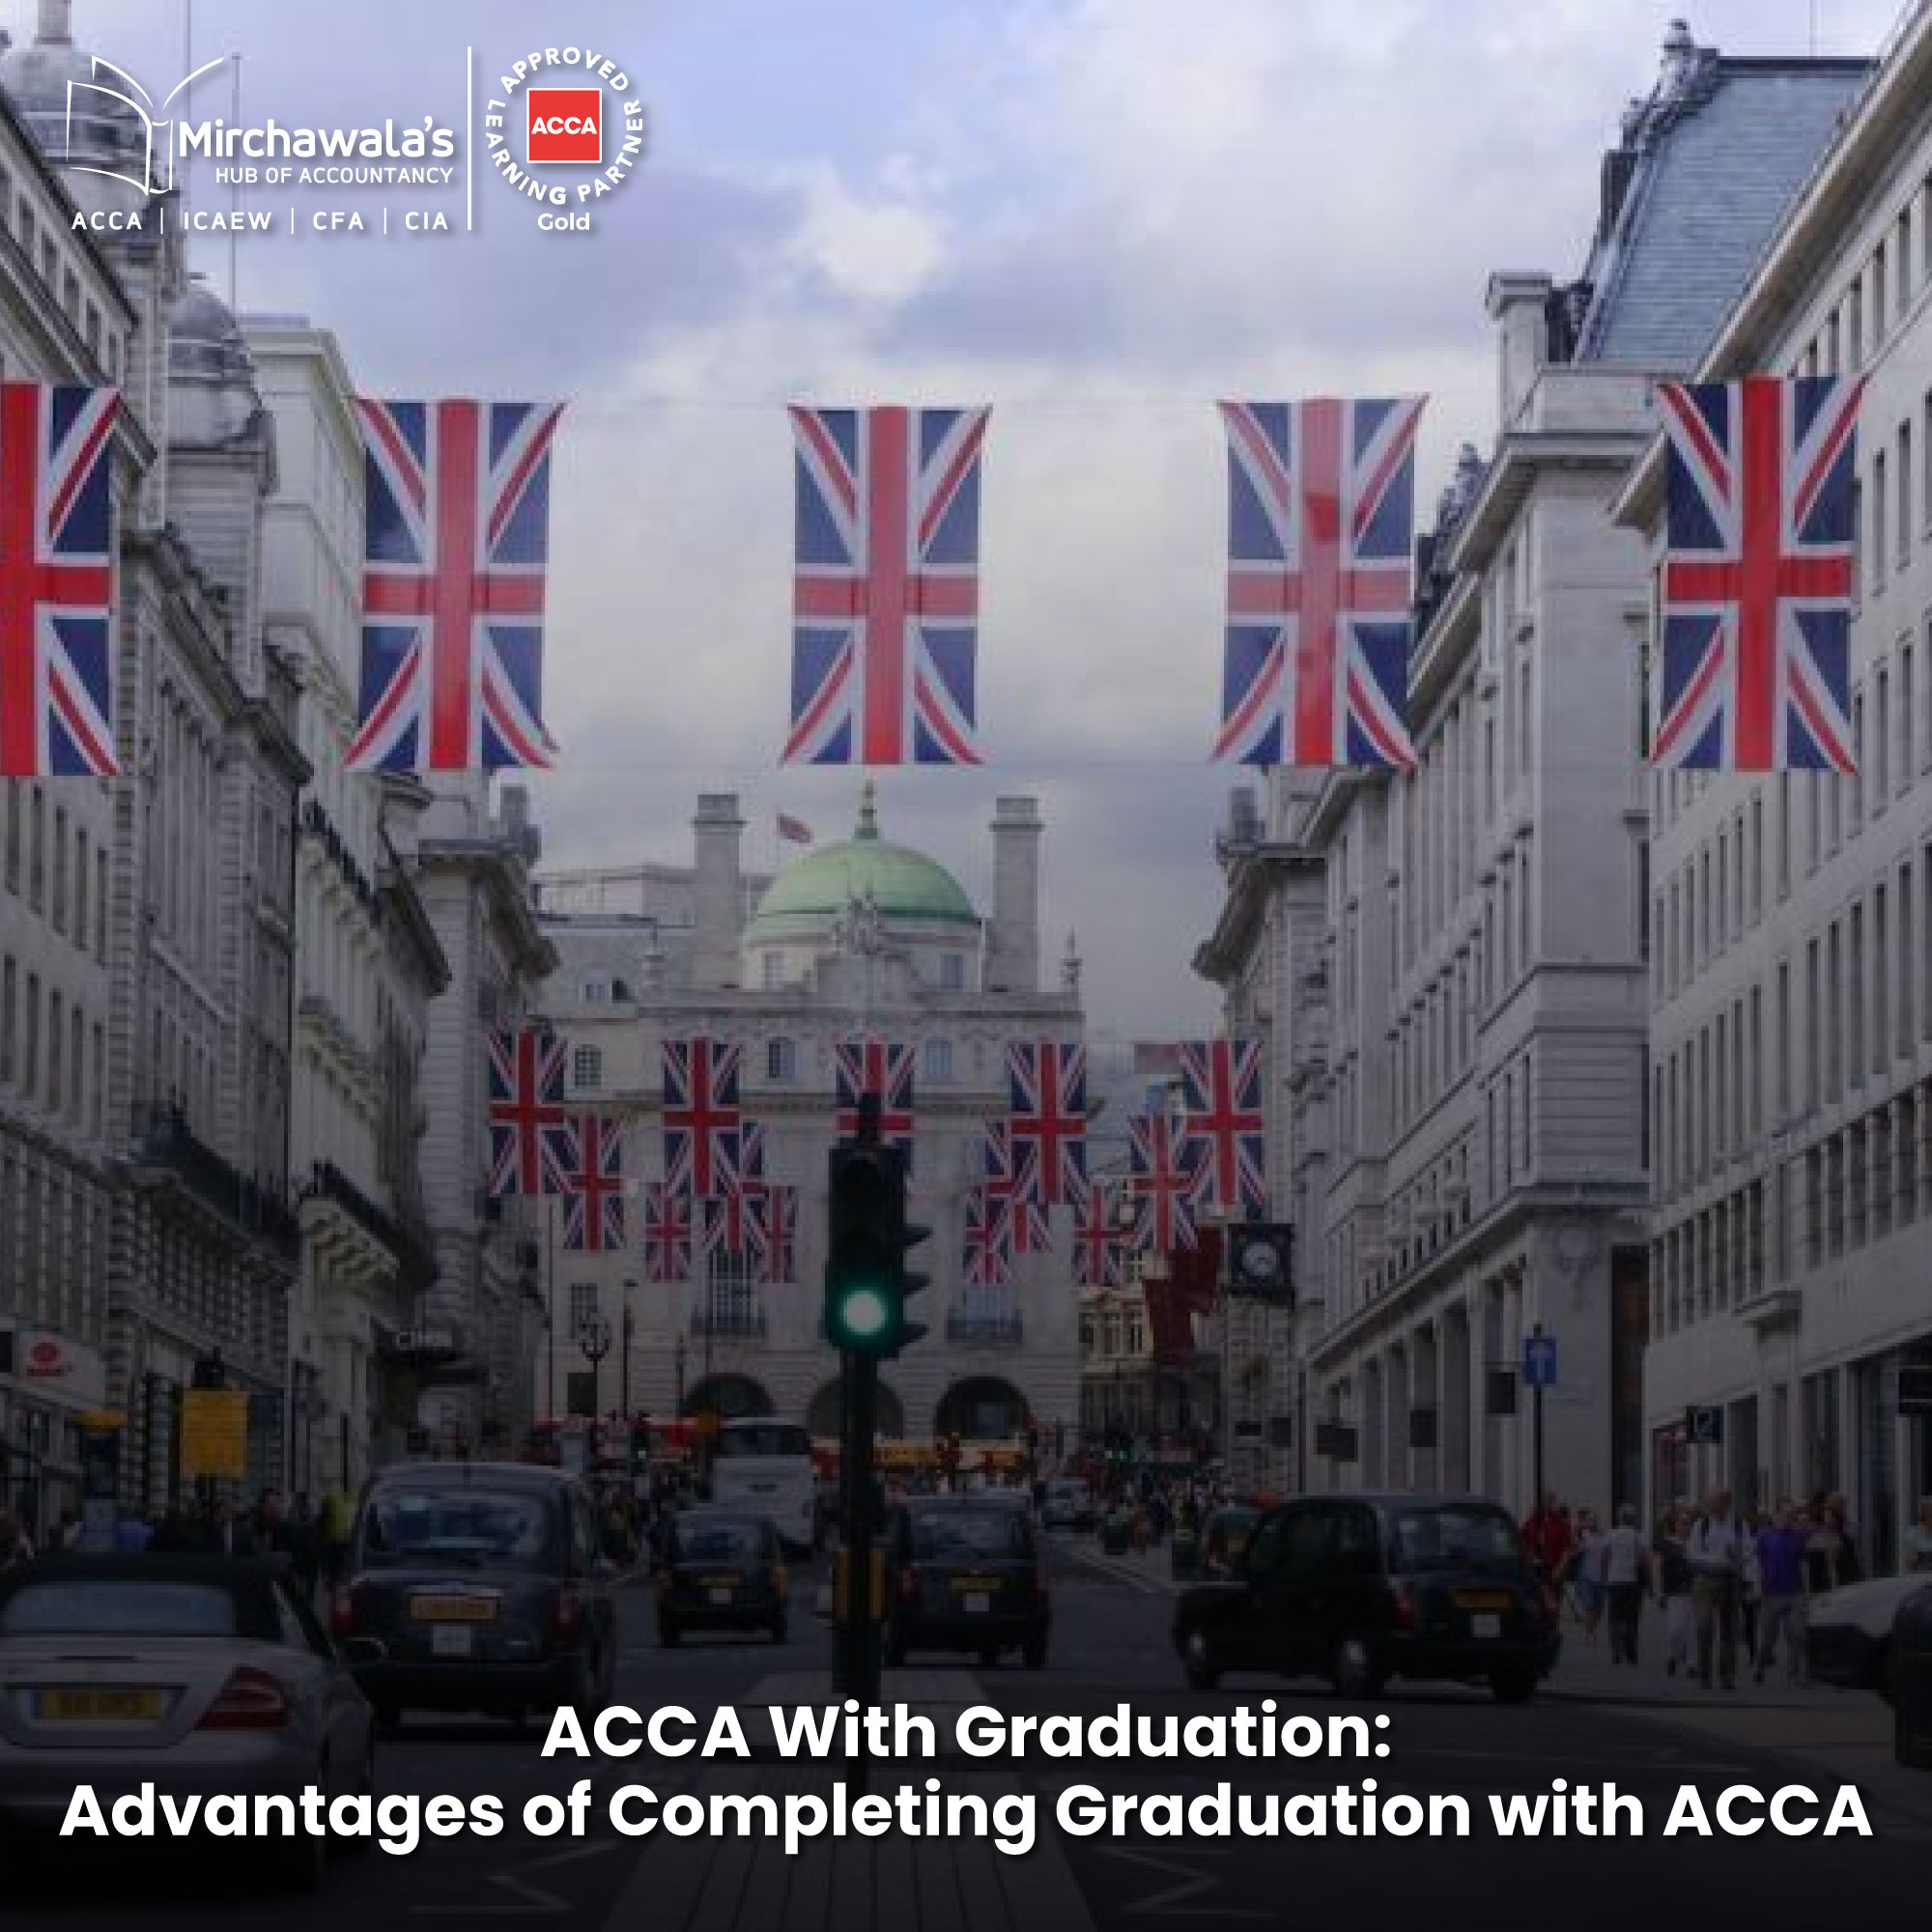 ACCA With Graduation: Advantages of Completing Graduation with ACCA